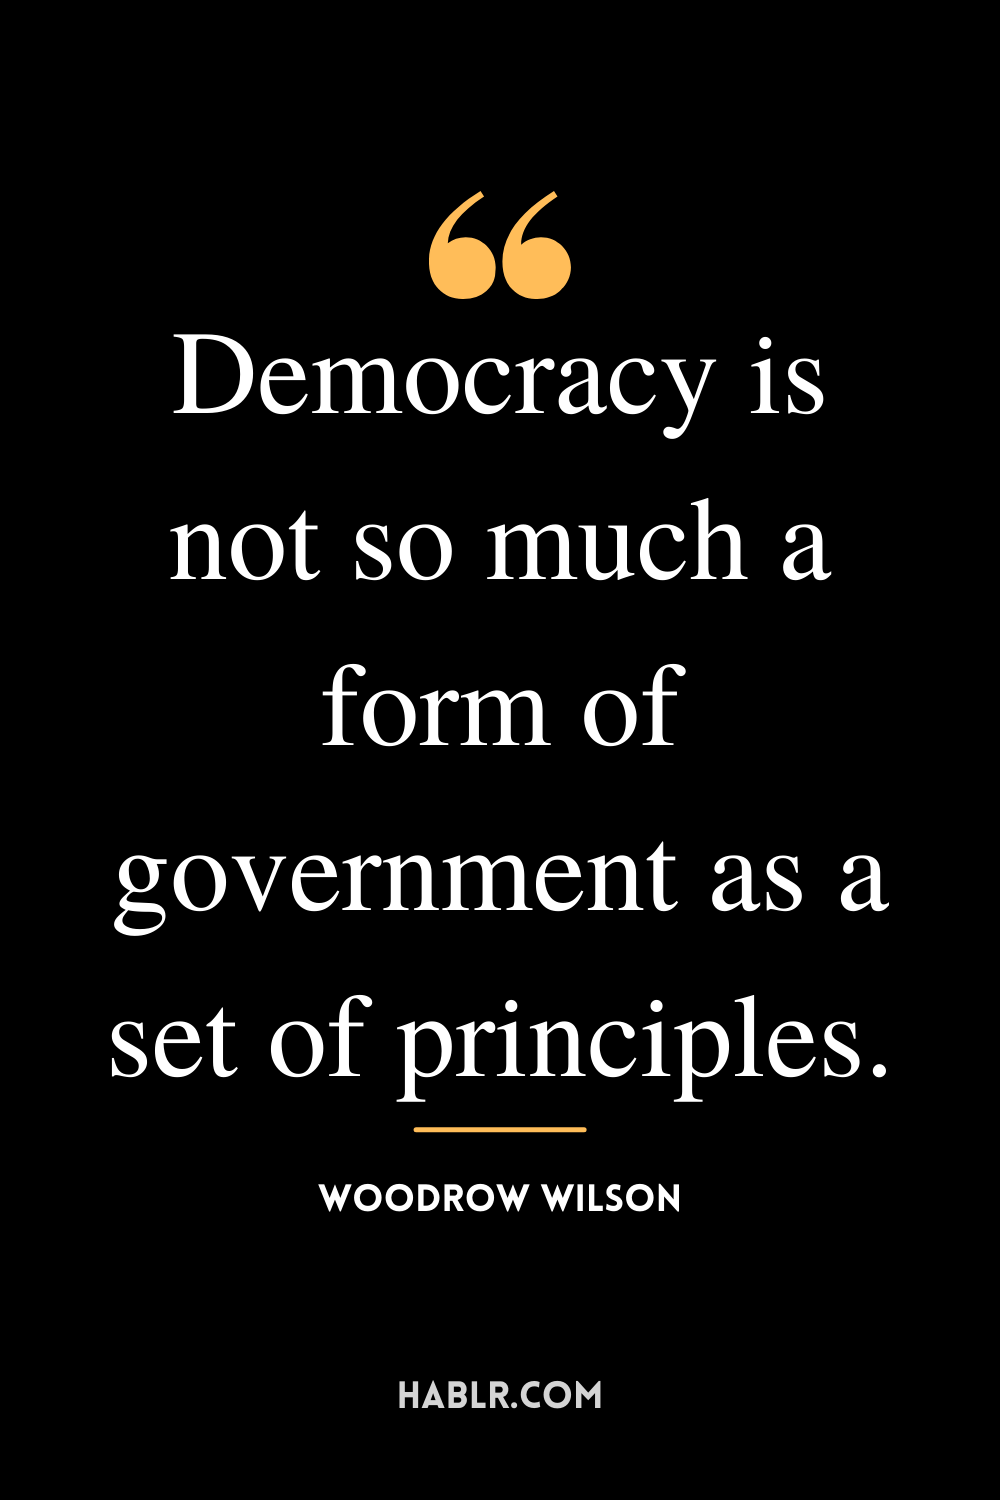 “Democracy is not so much a form of government as a set of principles.” -Woodrow Wilson